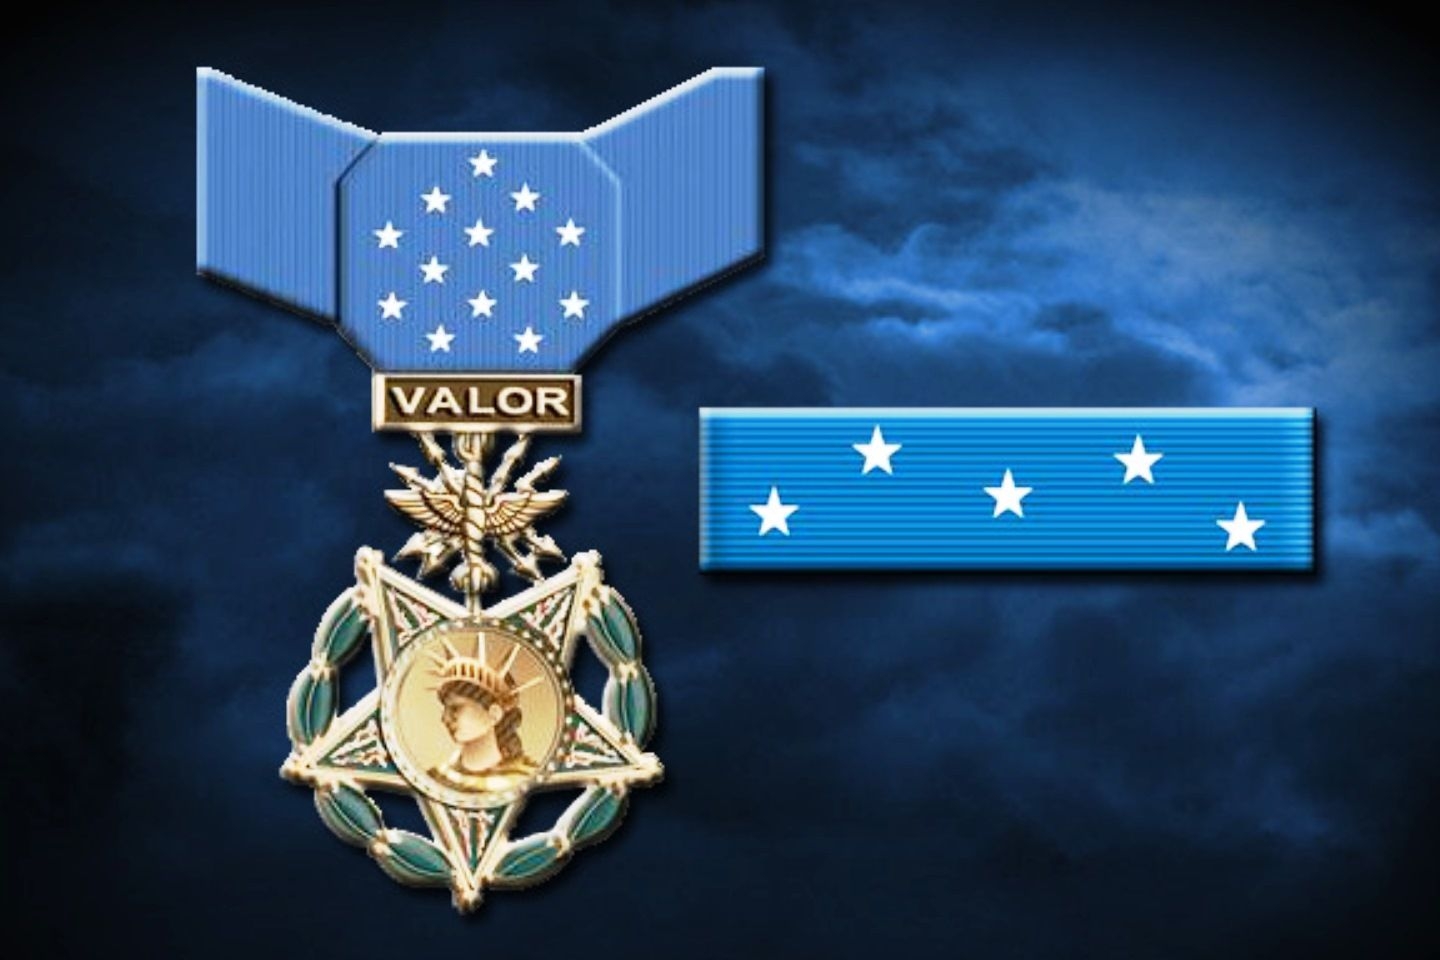 https://www.afpc.af.mil/About/Fact-Sheets/Display/Article/421864/medal-of-honor/
